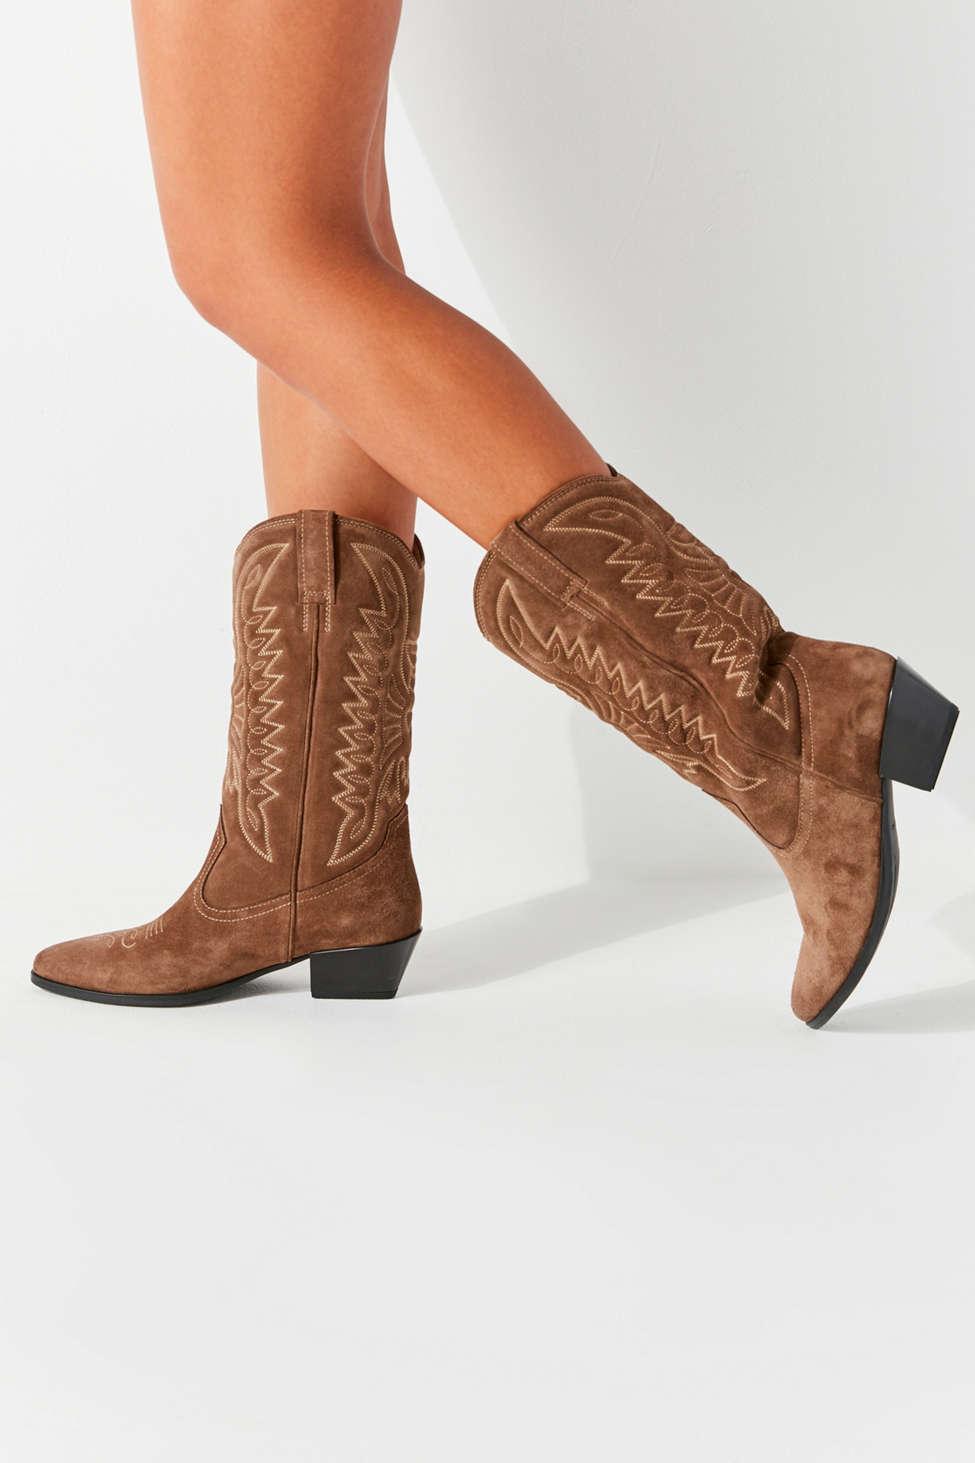 Withered Hotellet Jernbanestation Vagabond Shoemakers Emily Suede Cowboy Boot in Brown | Lyst